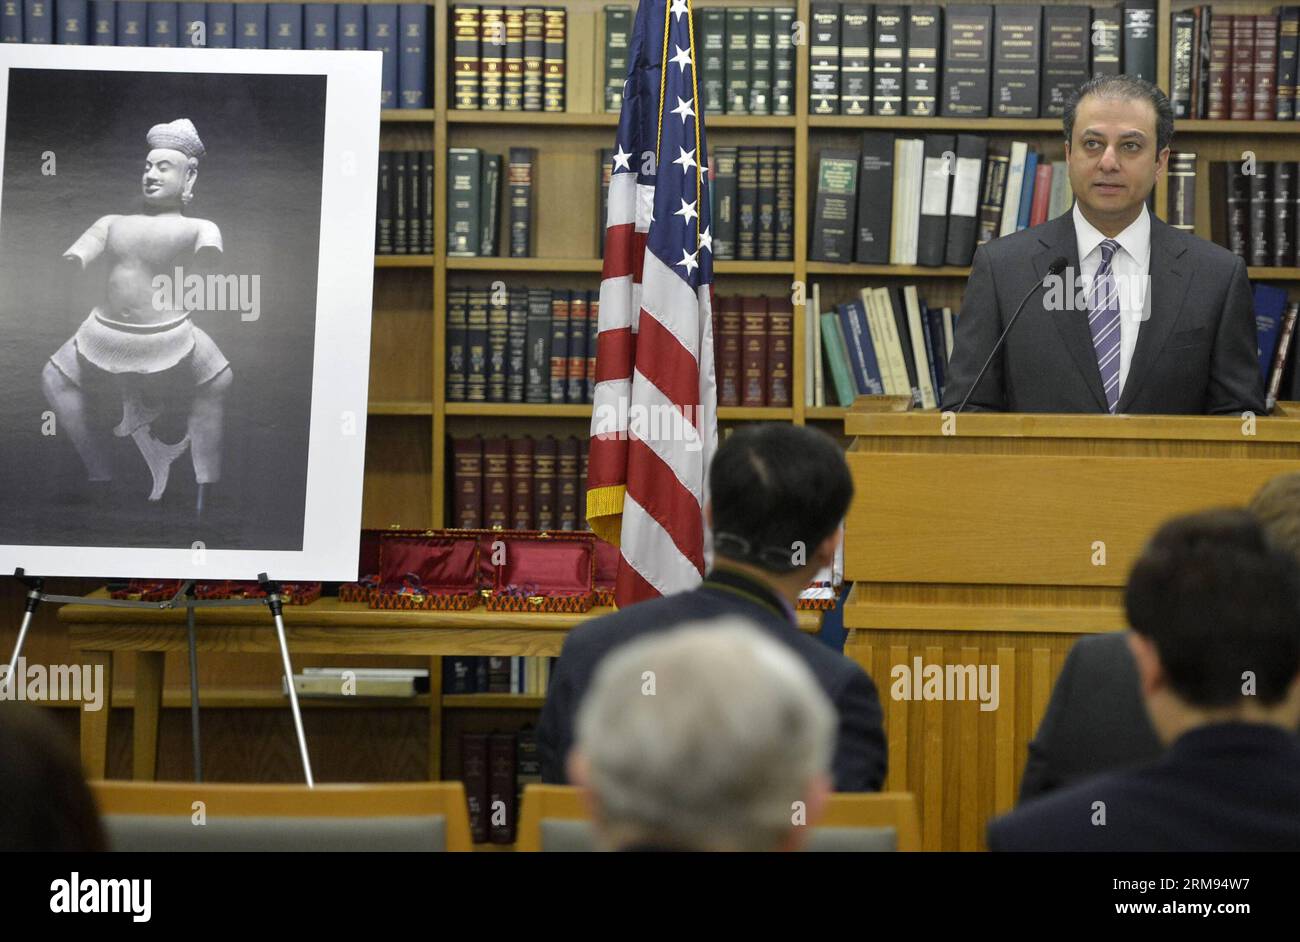 Preet Bharara, the U.S. Attorney for the southern District of New York, speaks at a handover ceremony of the ancient statue of Duryodhana in New York, the United States, May 7, 2014. The Duryodhana, a 10th Century sandstone sculpture, which alleged to be stolen from the Prasat Chen temple at Koh Ker by an organized looting network, and ultimately imported into U.S. for sale by Sotheby s Inc.. In April 2012, the U.S. Attorney filed a court action in Federal Court seeking forfeiture of the statue and handing back to Cambodia. In December 2013, Sotheby s decided to settle the case by agreeing to Stock Photo